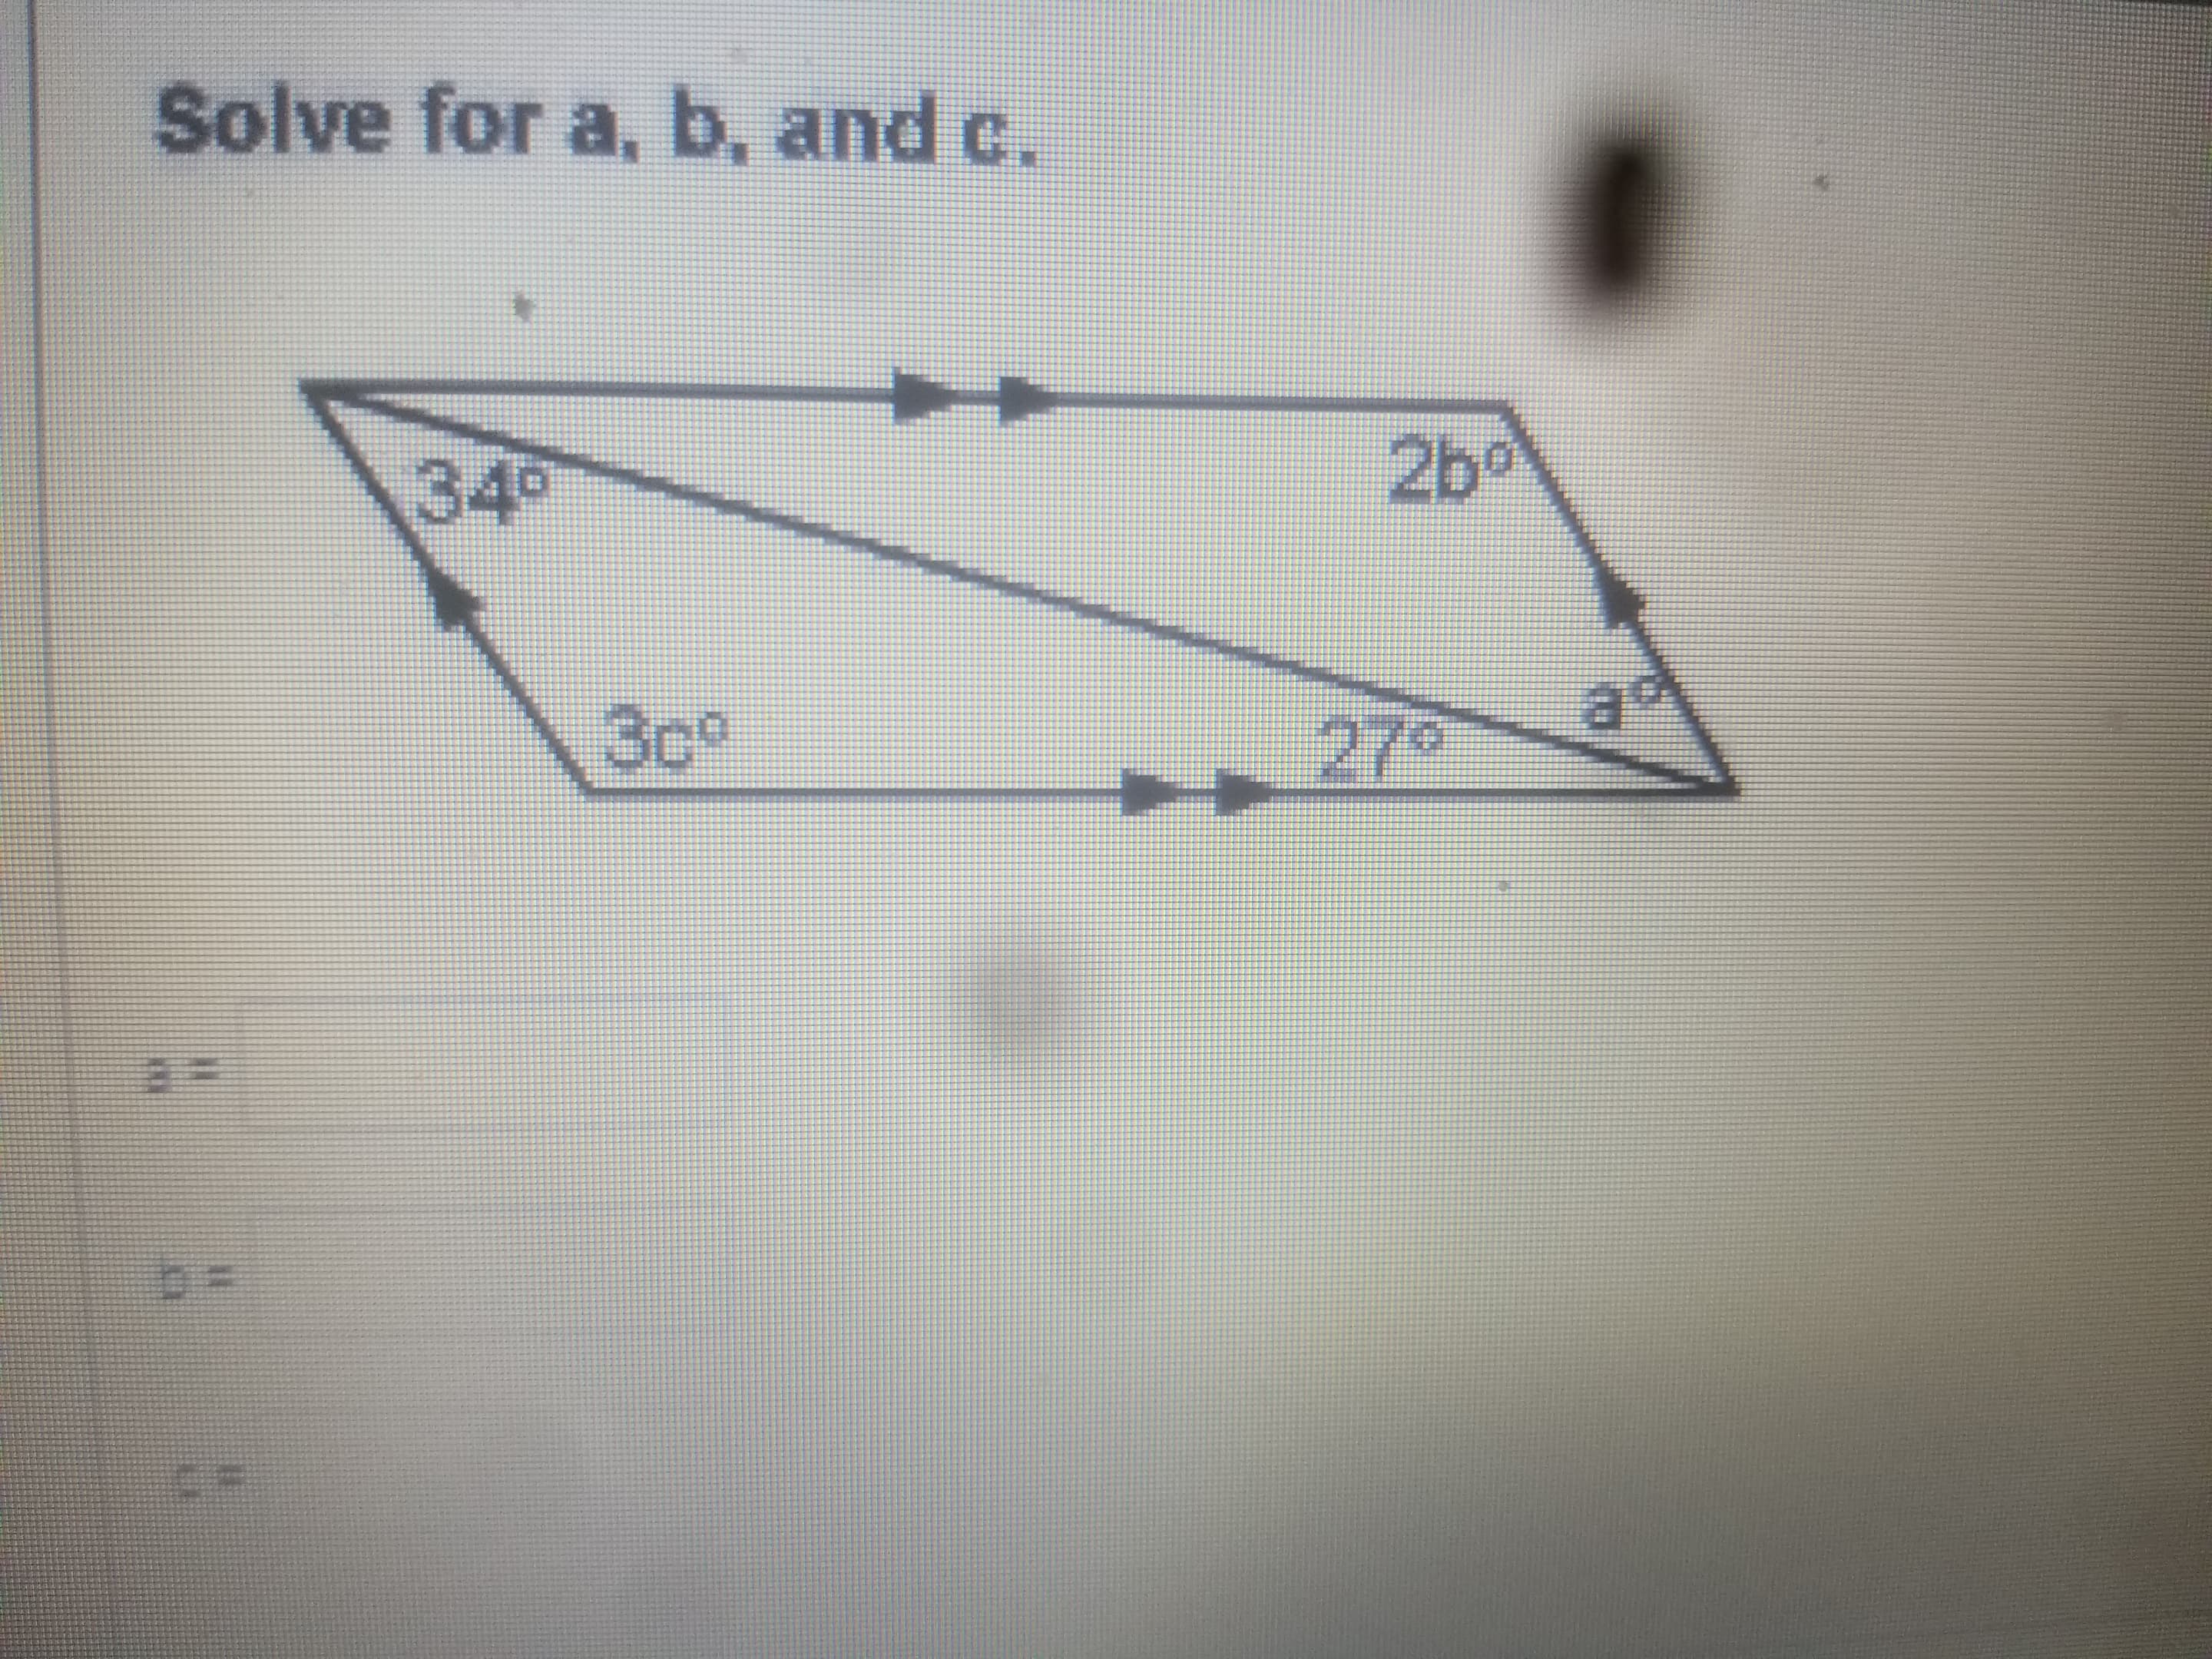 Solve for a, b, and c.
340
2bo
3c°
27
ad
